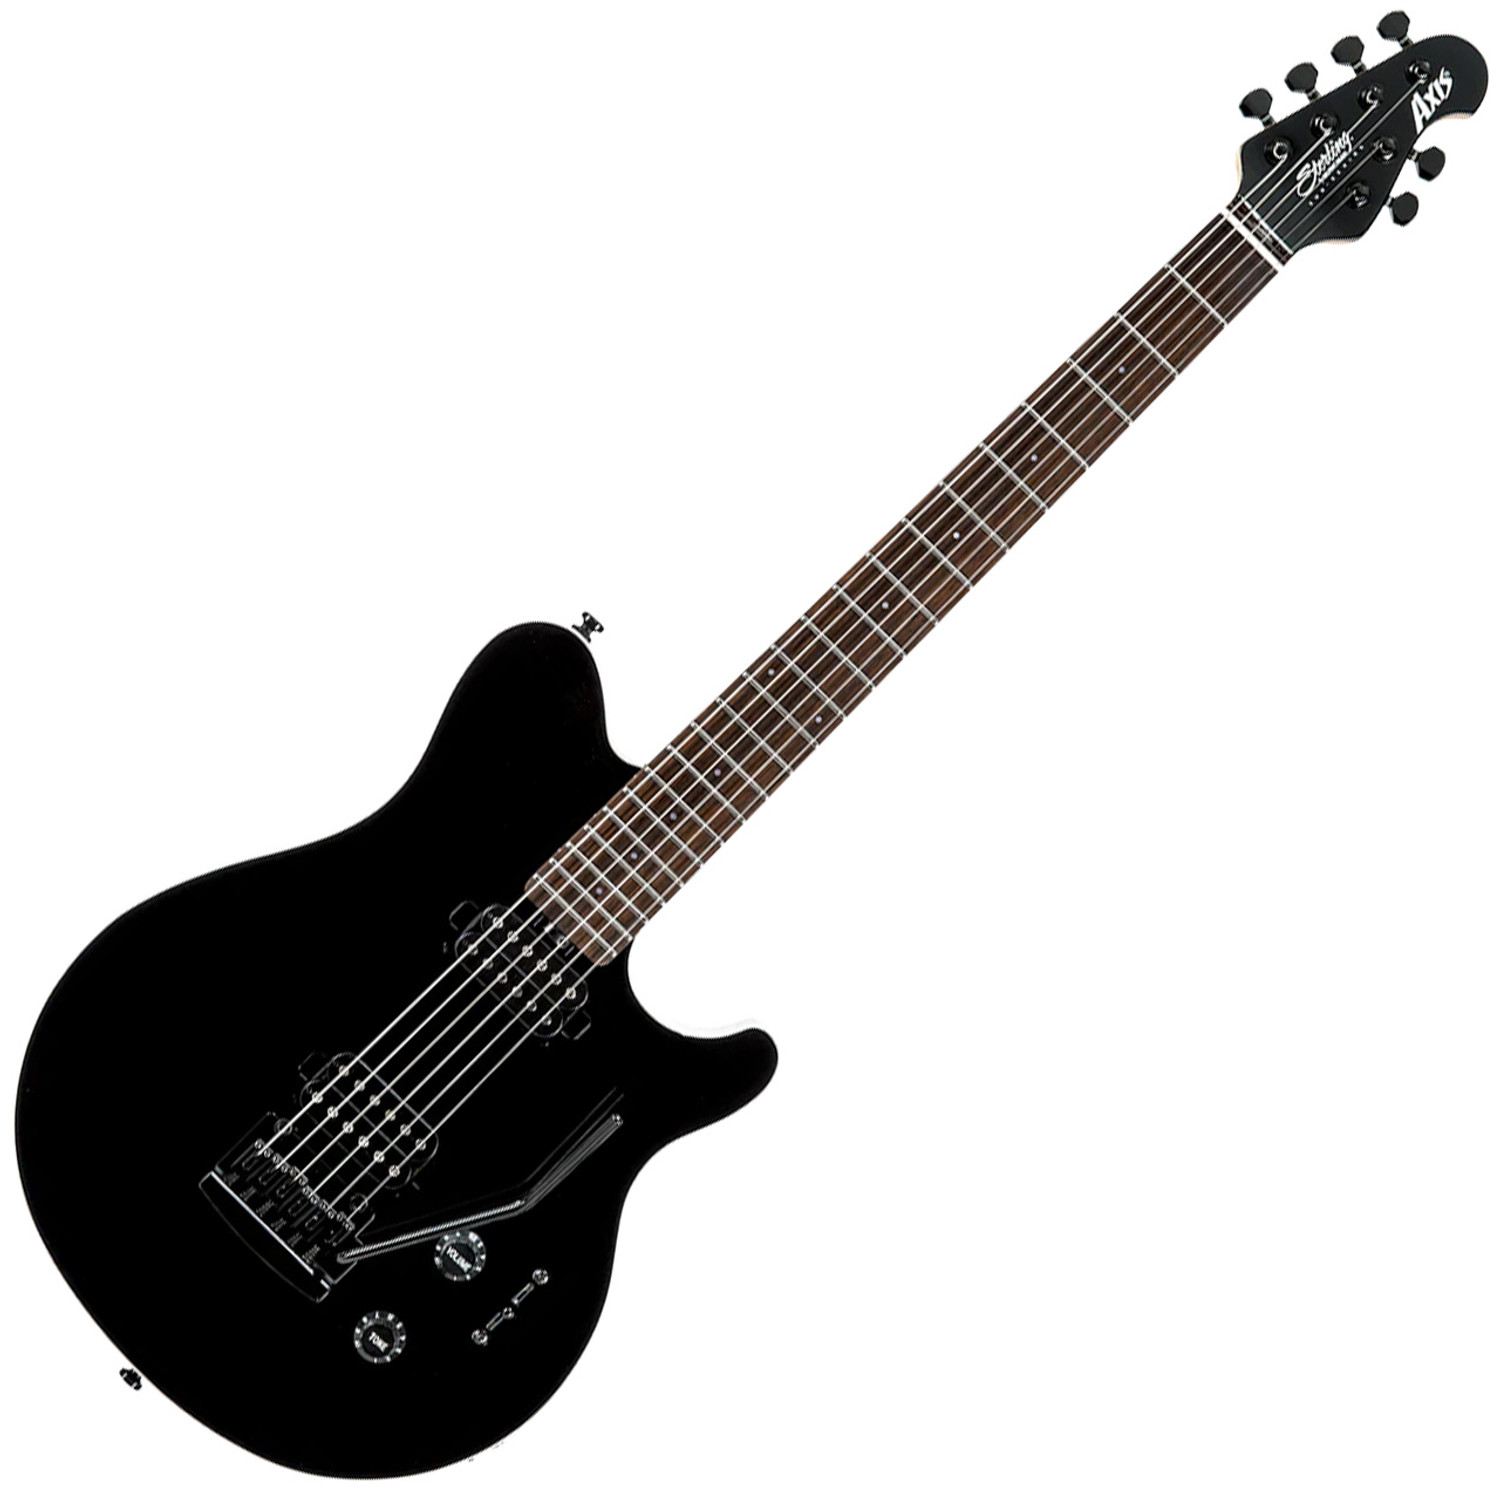 Sterling by Music Man Axis in Black with White Body Binding at 